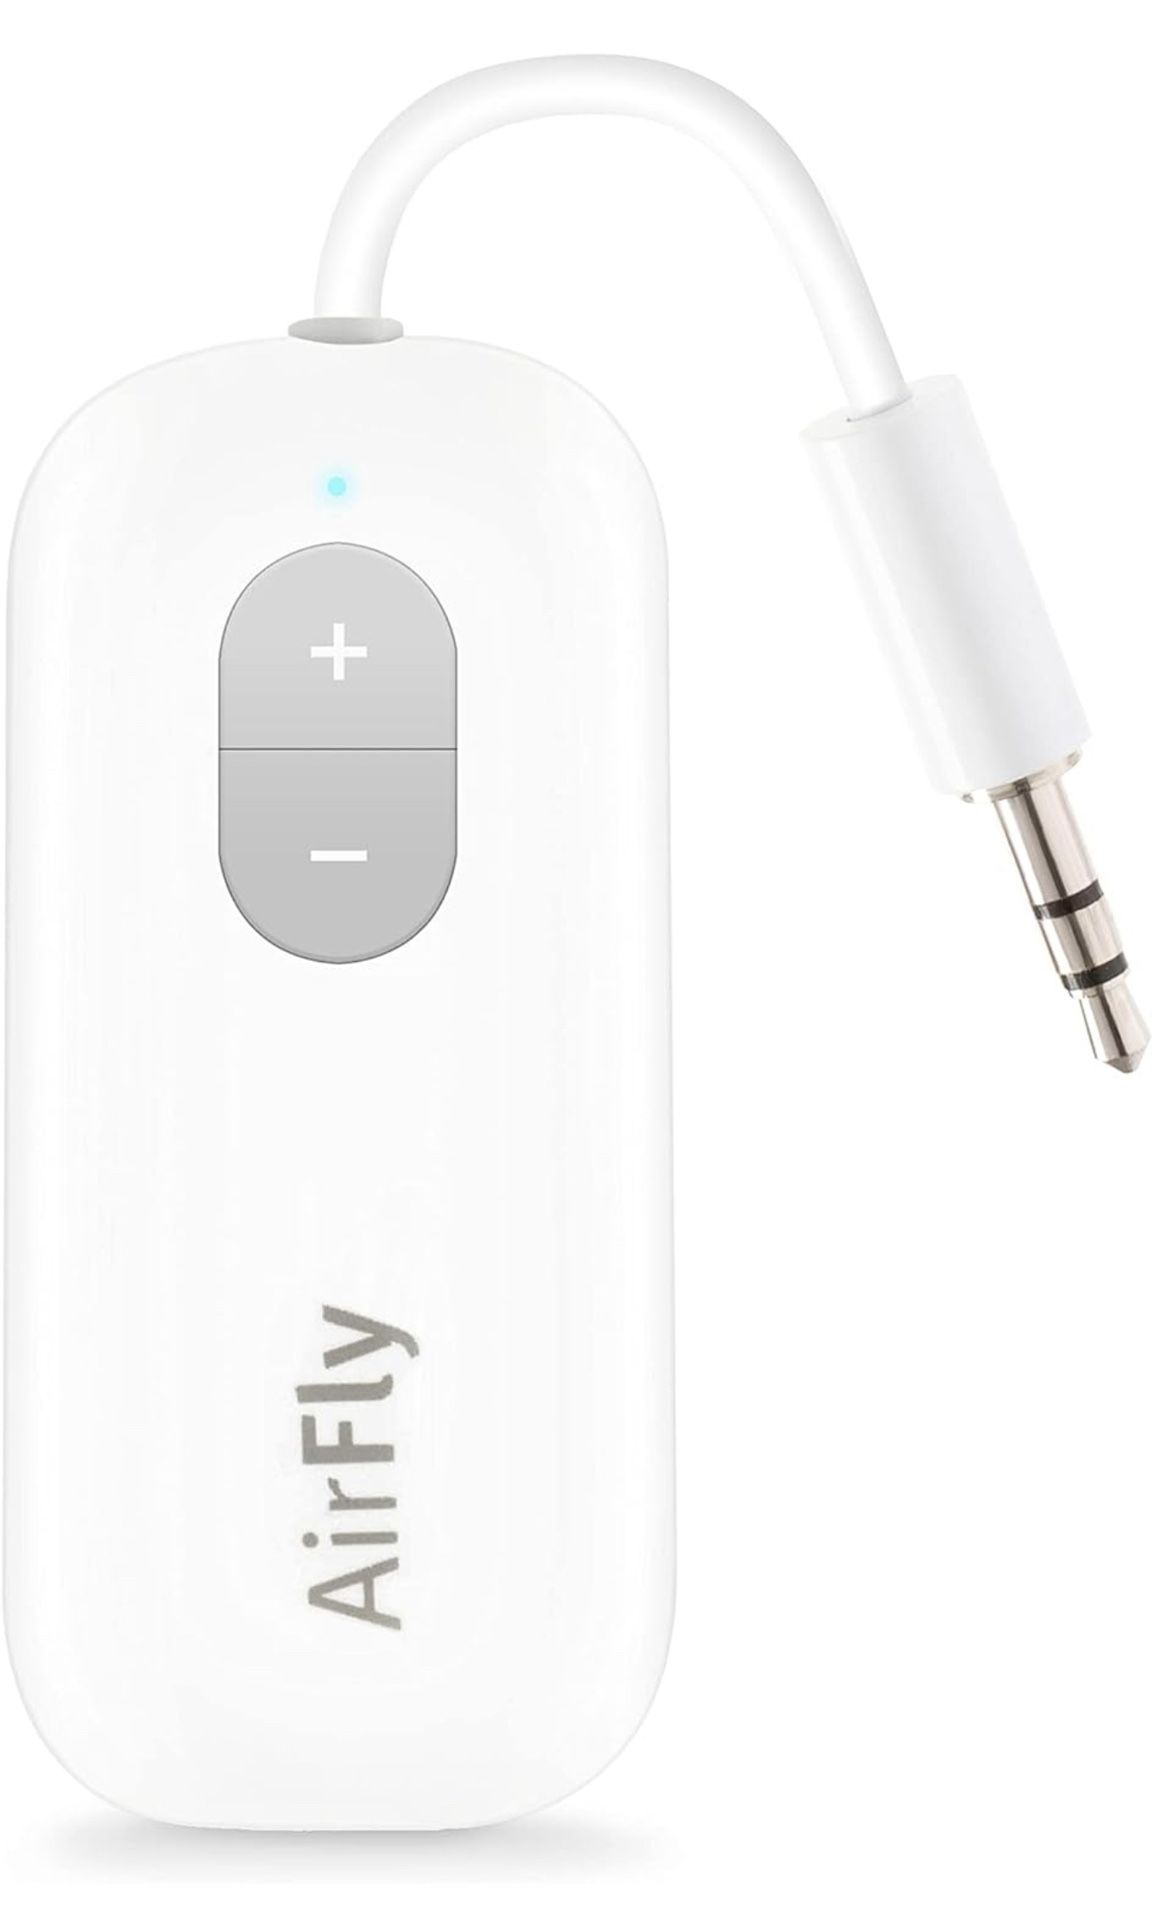 AirFly SE Bluetooth Wireless Audio Transmitter Receiver for AirPods or Wireless Headphones 